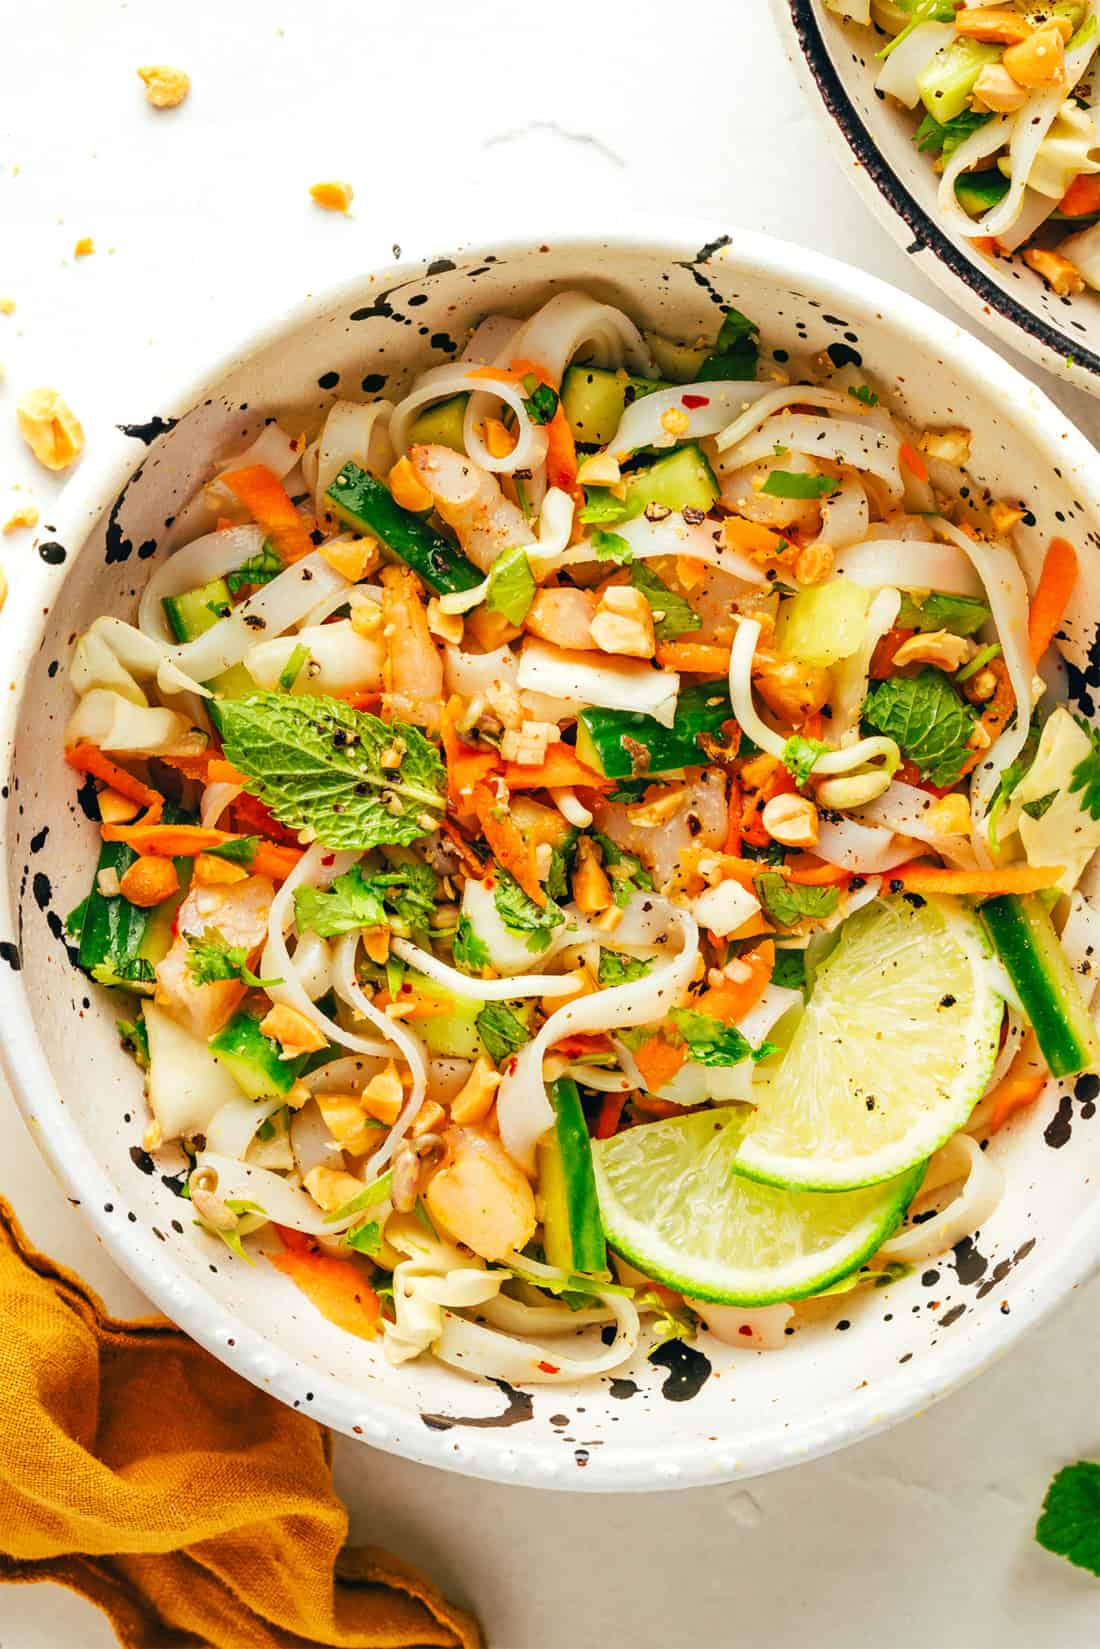 Vietnamese Spring Roll Salad - Gimme Some Oven